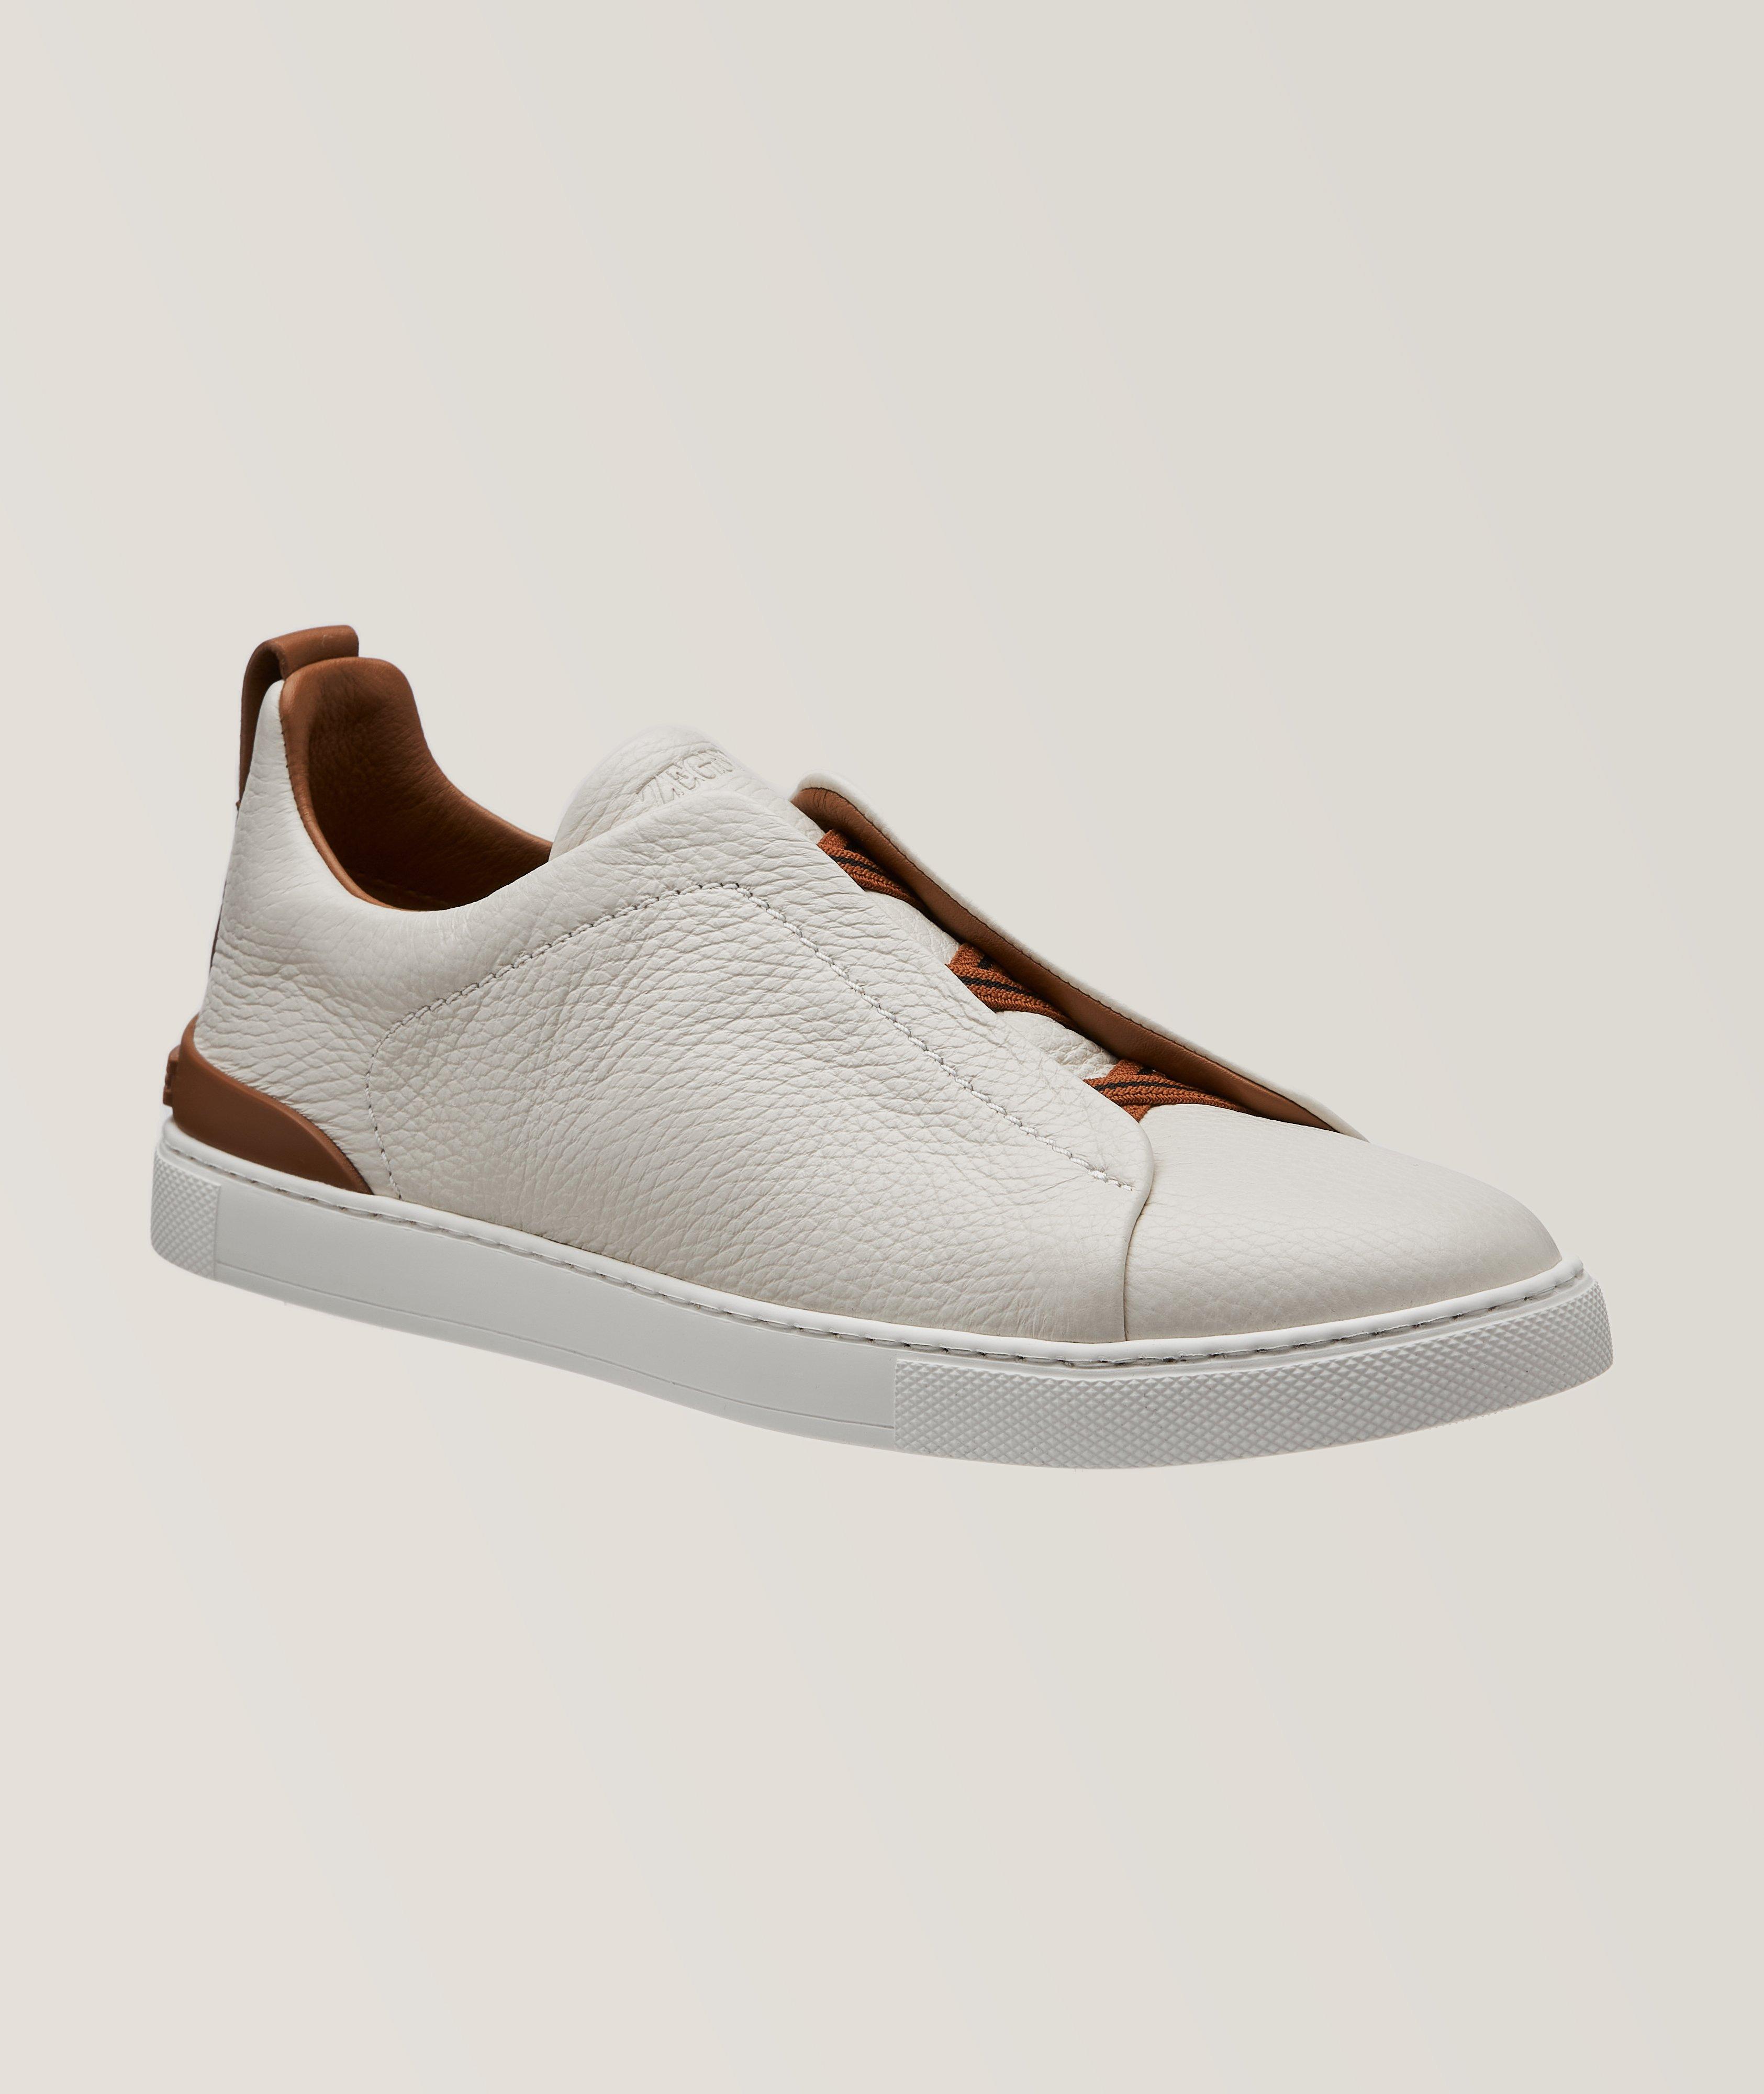 Zegna Leather Triple Stitch Sneakers